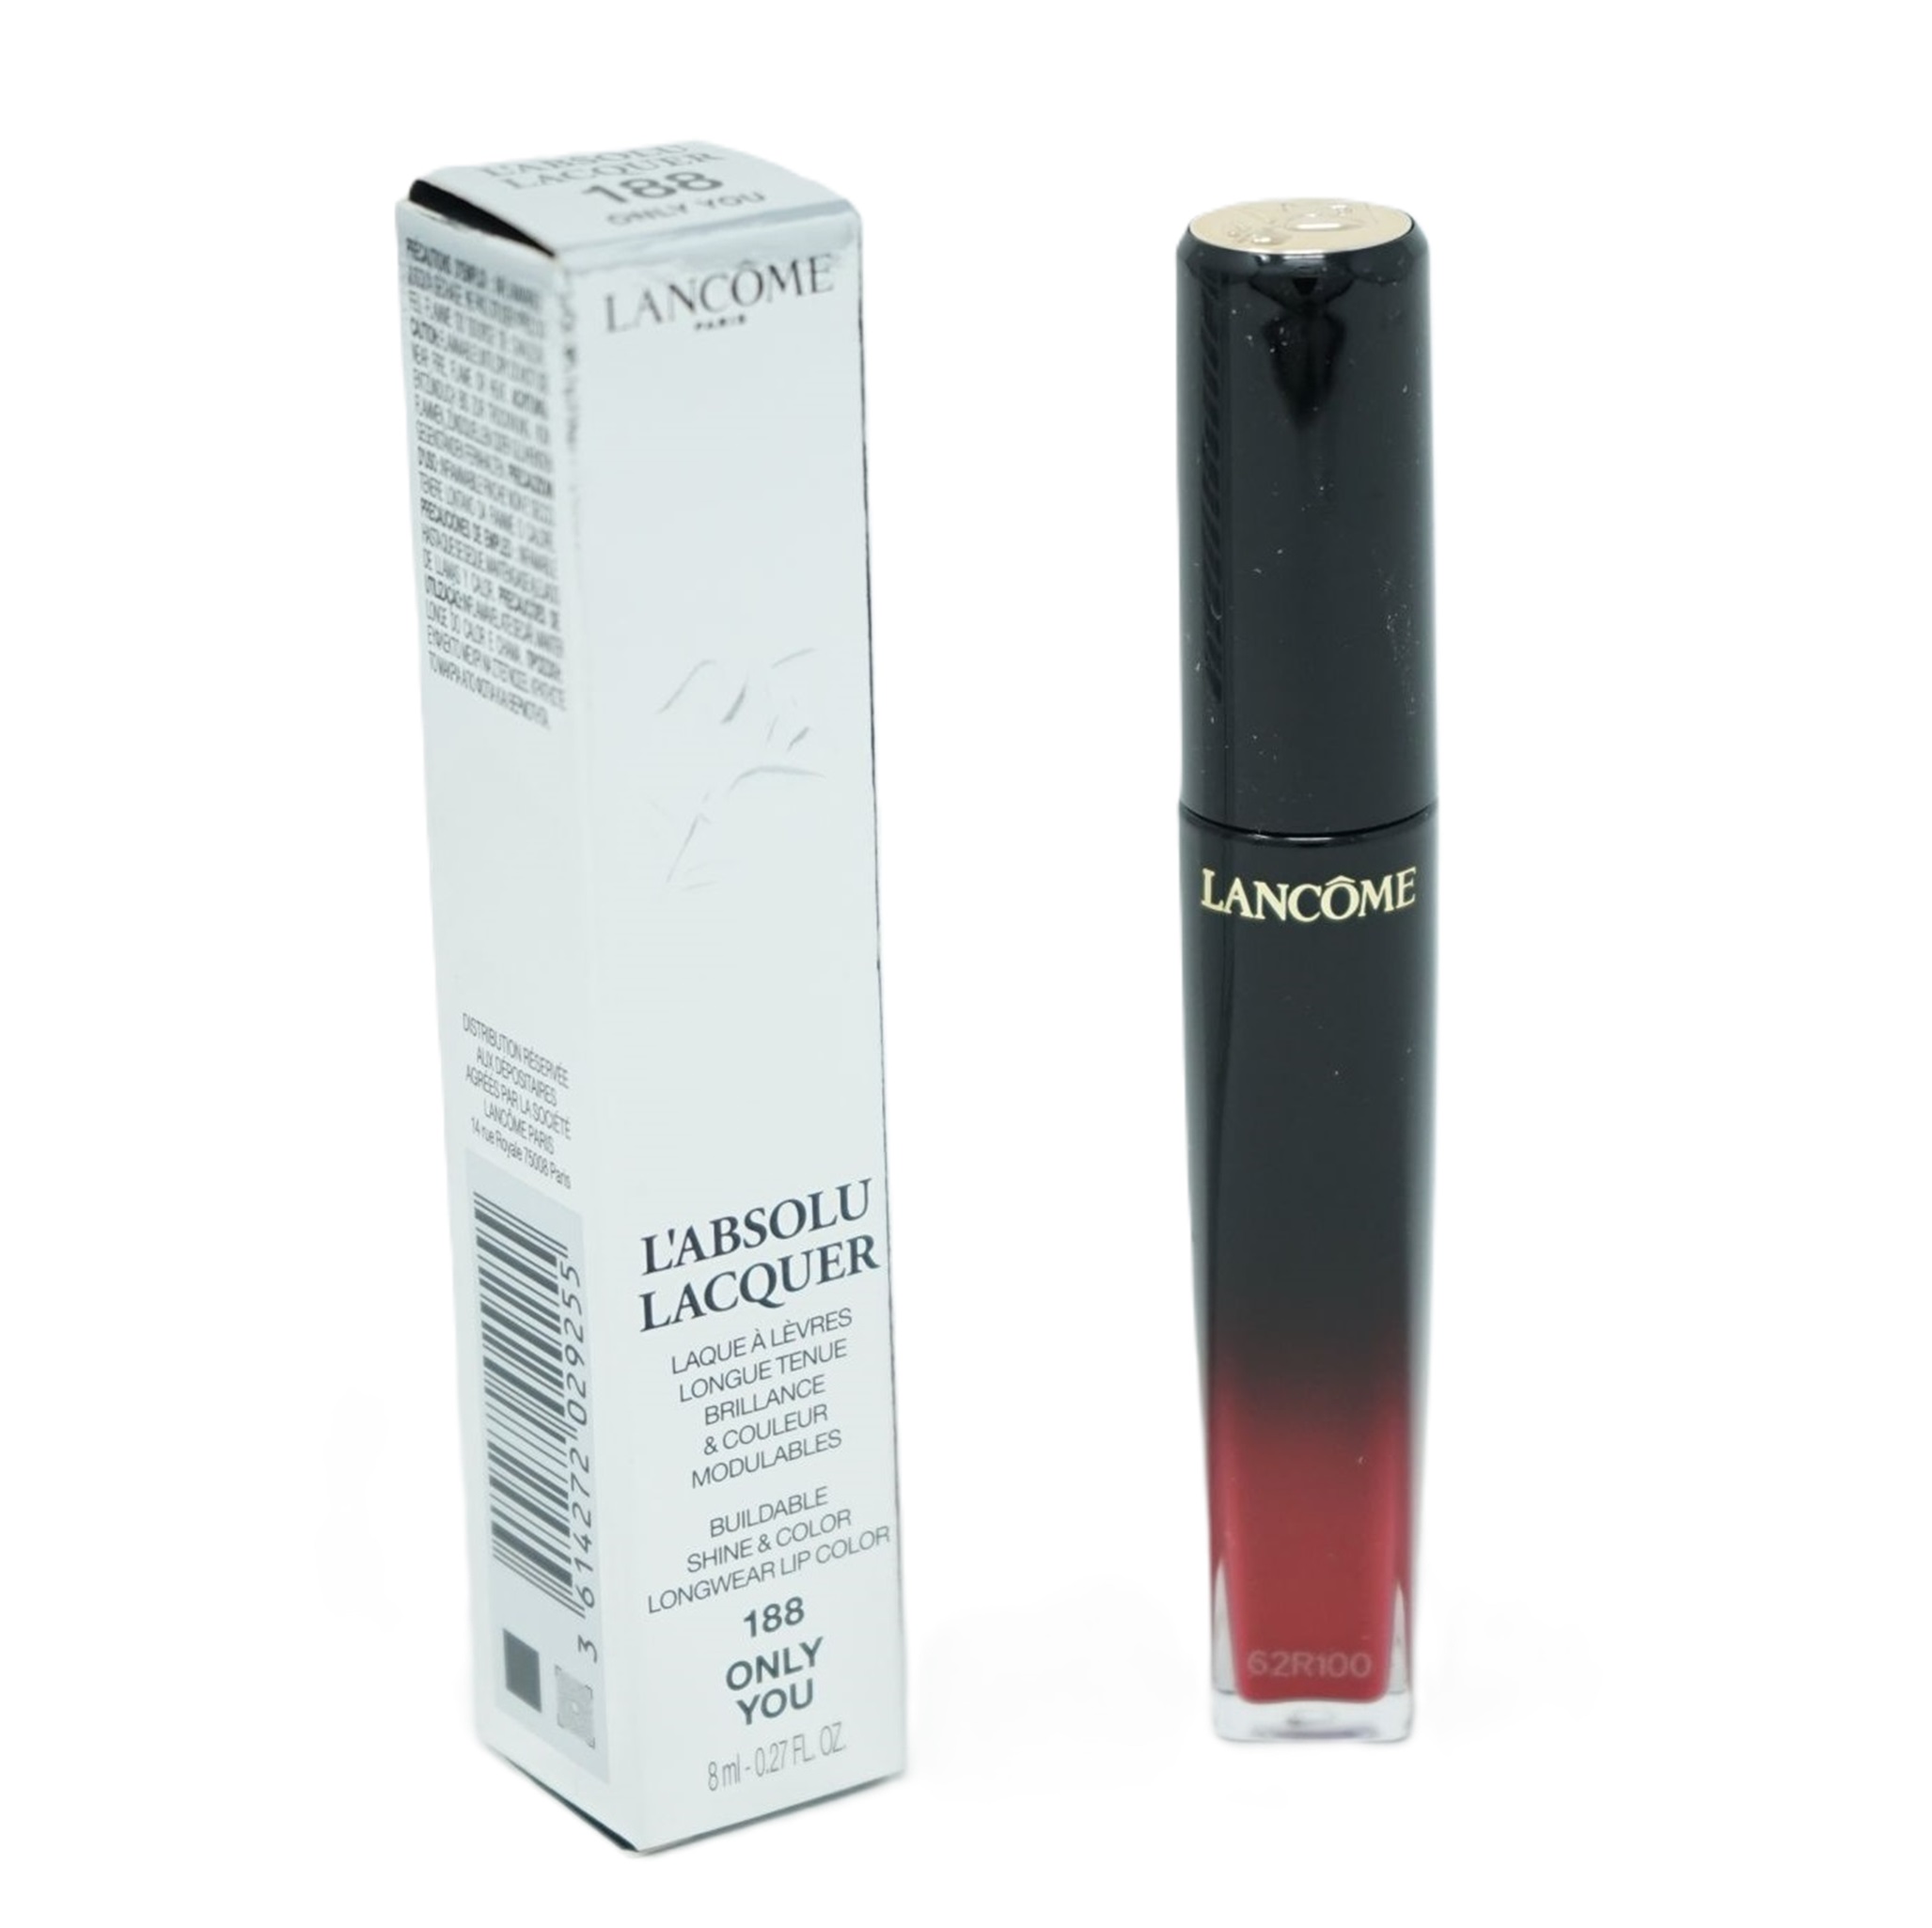 LANCOME L Absolu liquid Lipgloss 188 Only you